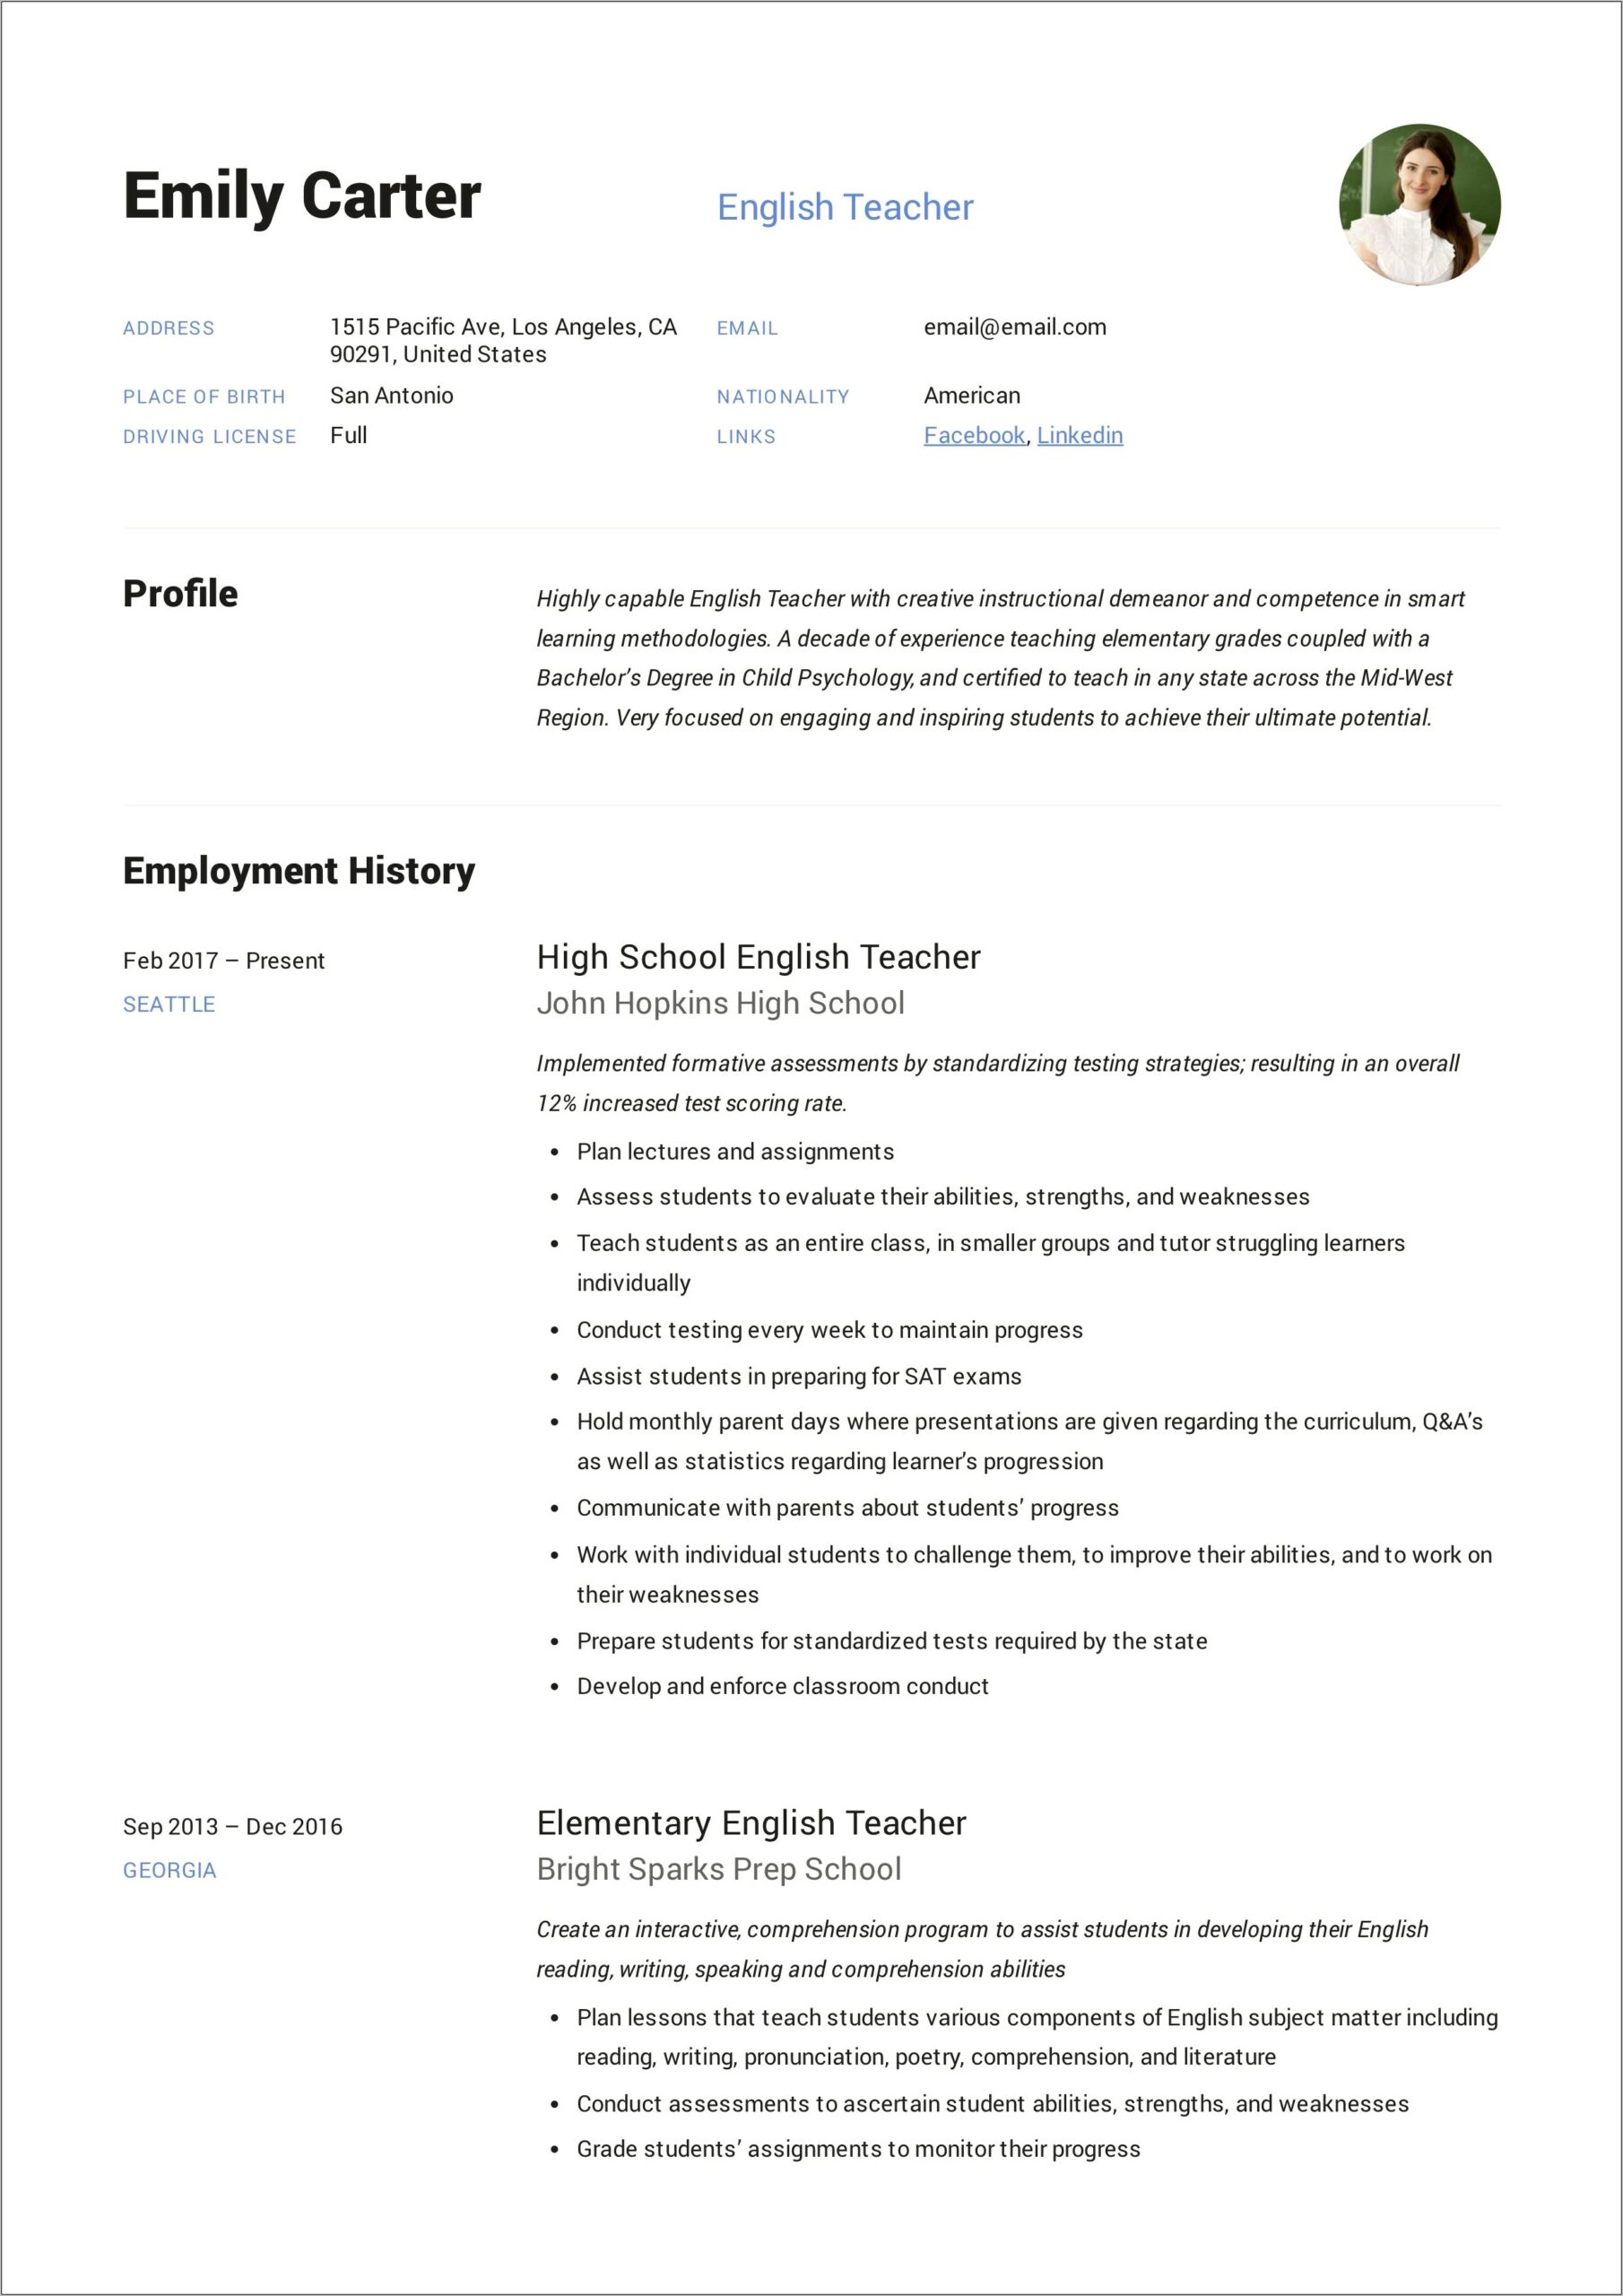 Resume Writing Applying For Pgt In A School